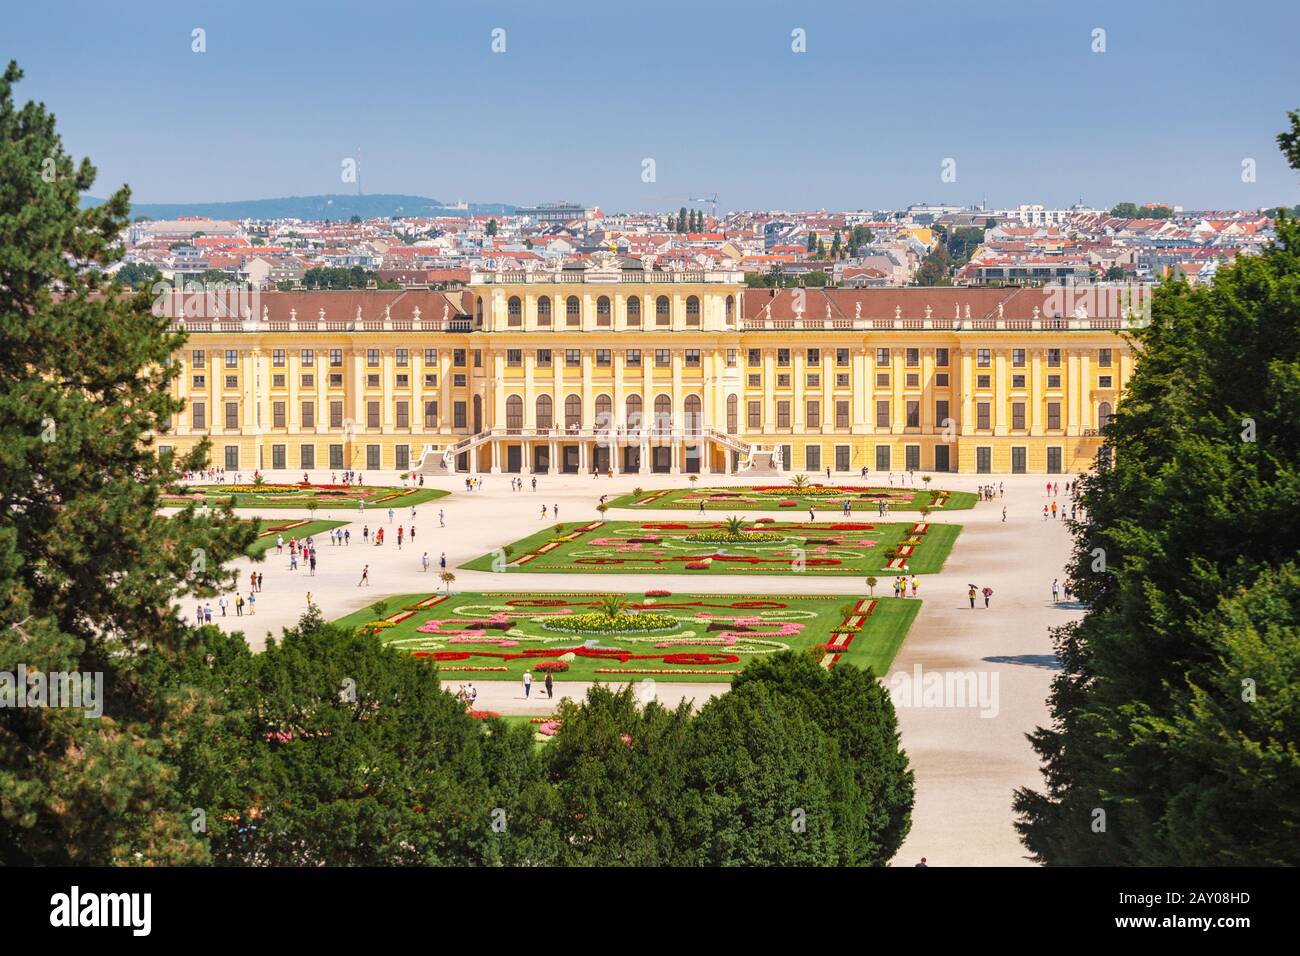 20 July 2019, Vienna, Austria: Tourists visiting famous Schonbrunn Palace, aerial view Stock Photo